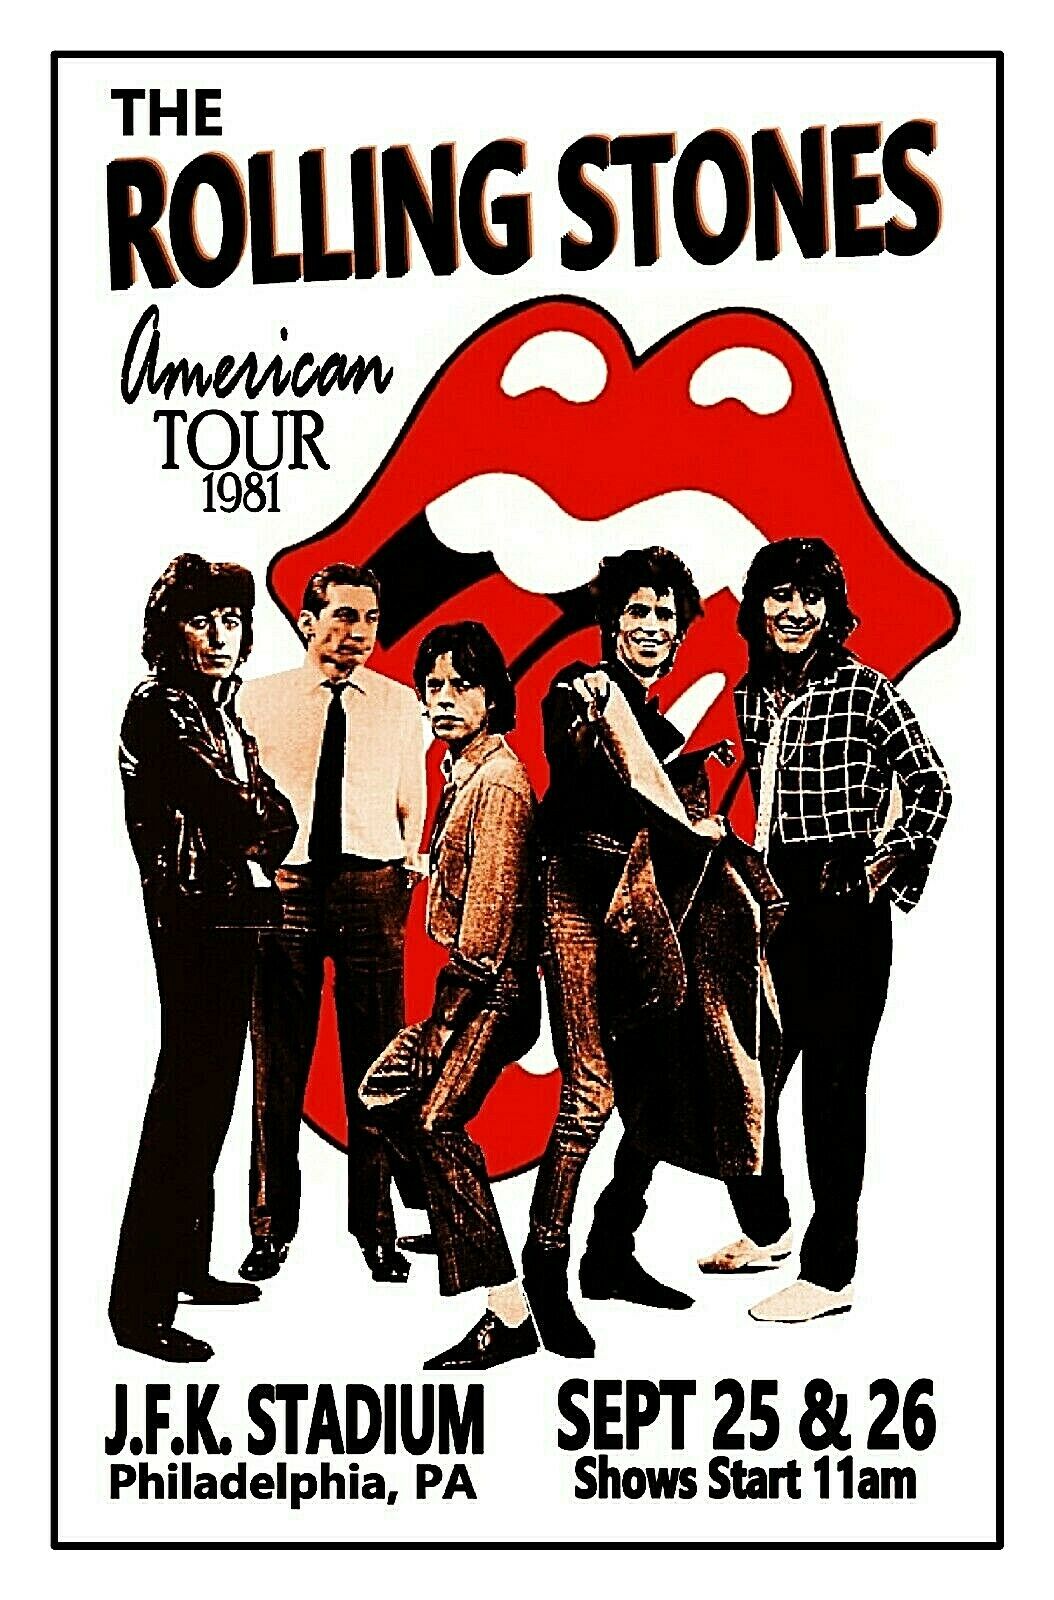 Rolling stones 1981 tour philly poster - Jacobs Media